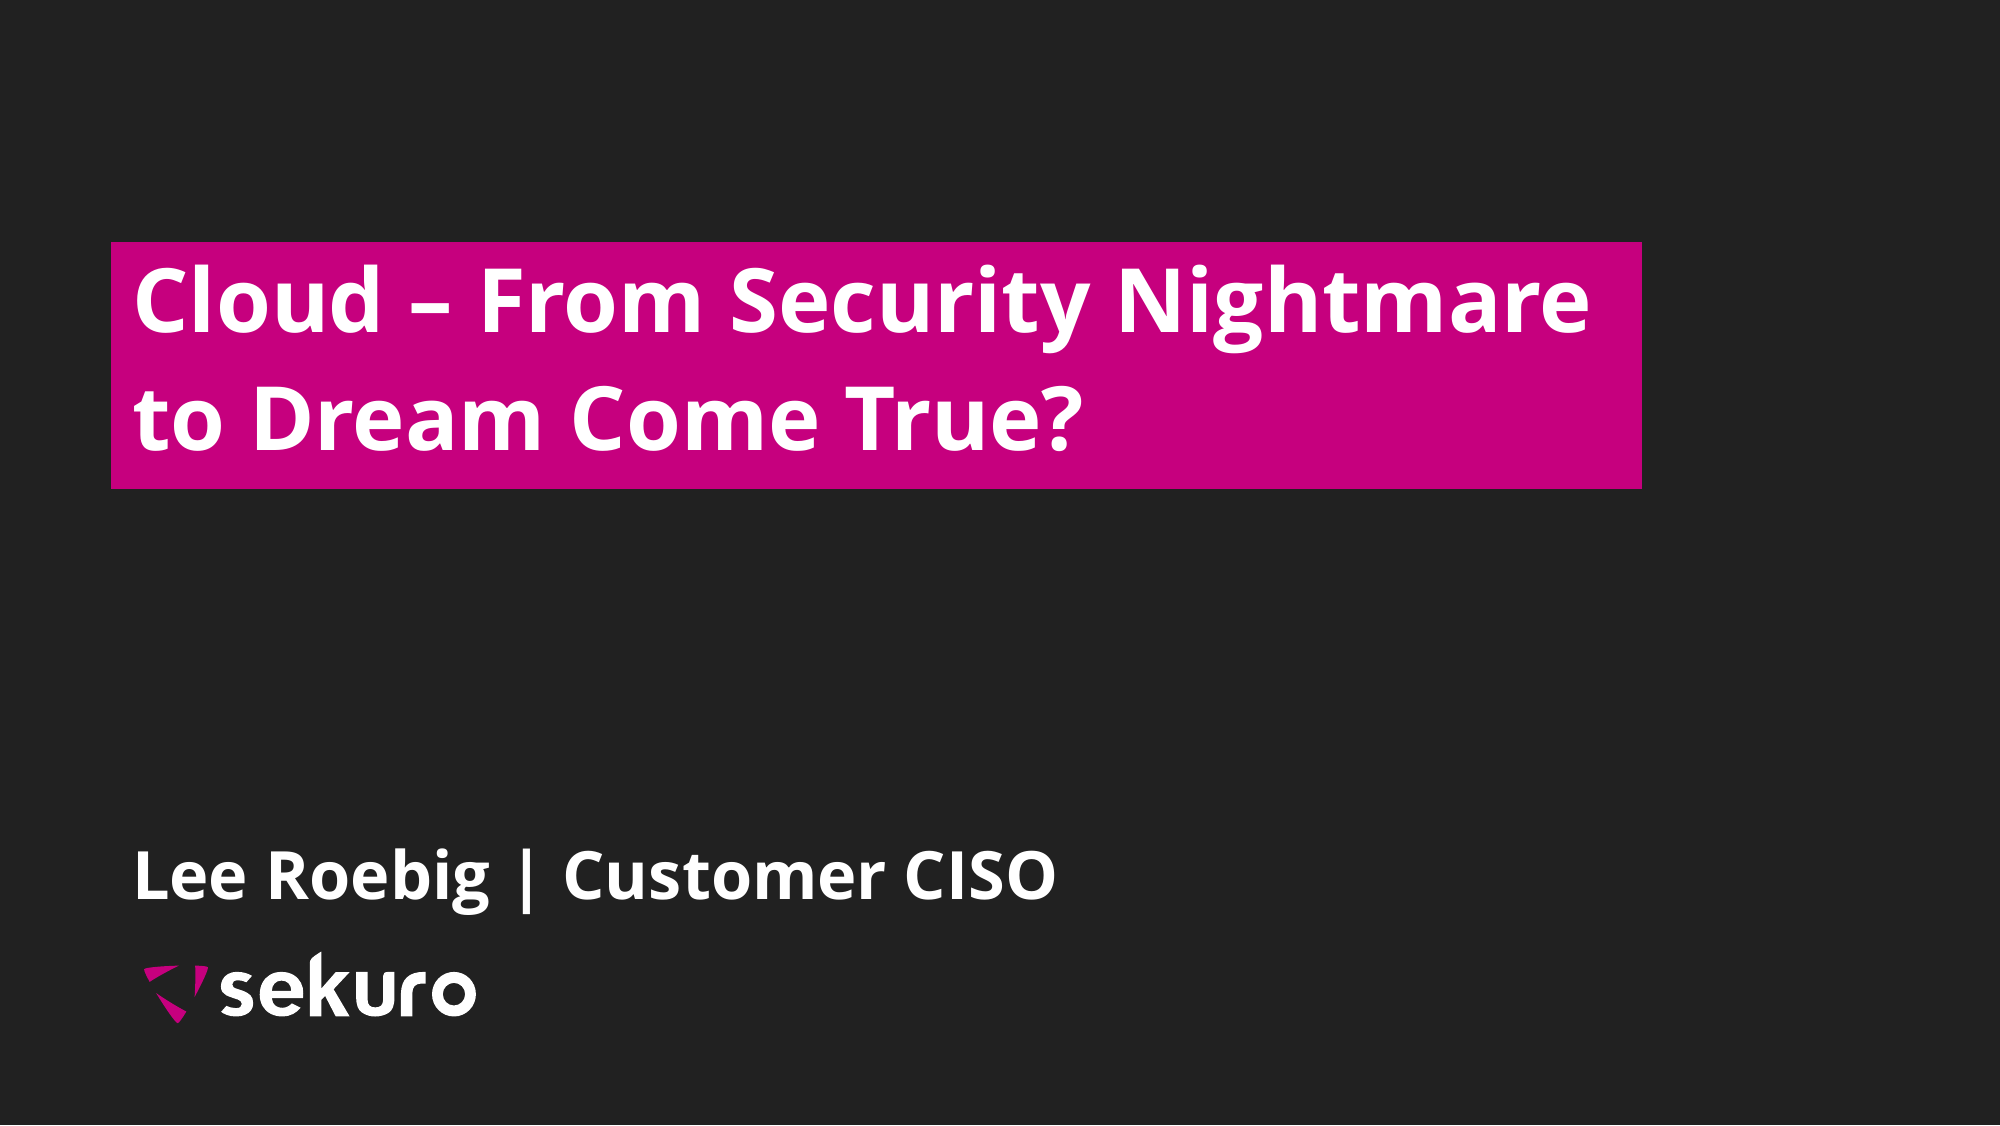 Cloud – From Security Nightmare to Dream Come True?